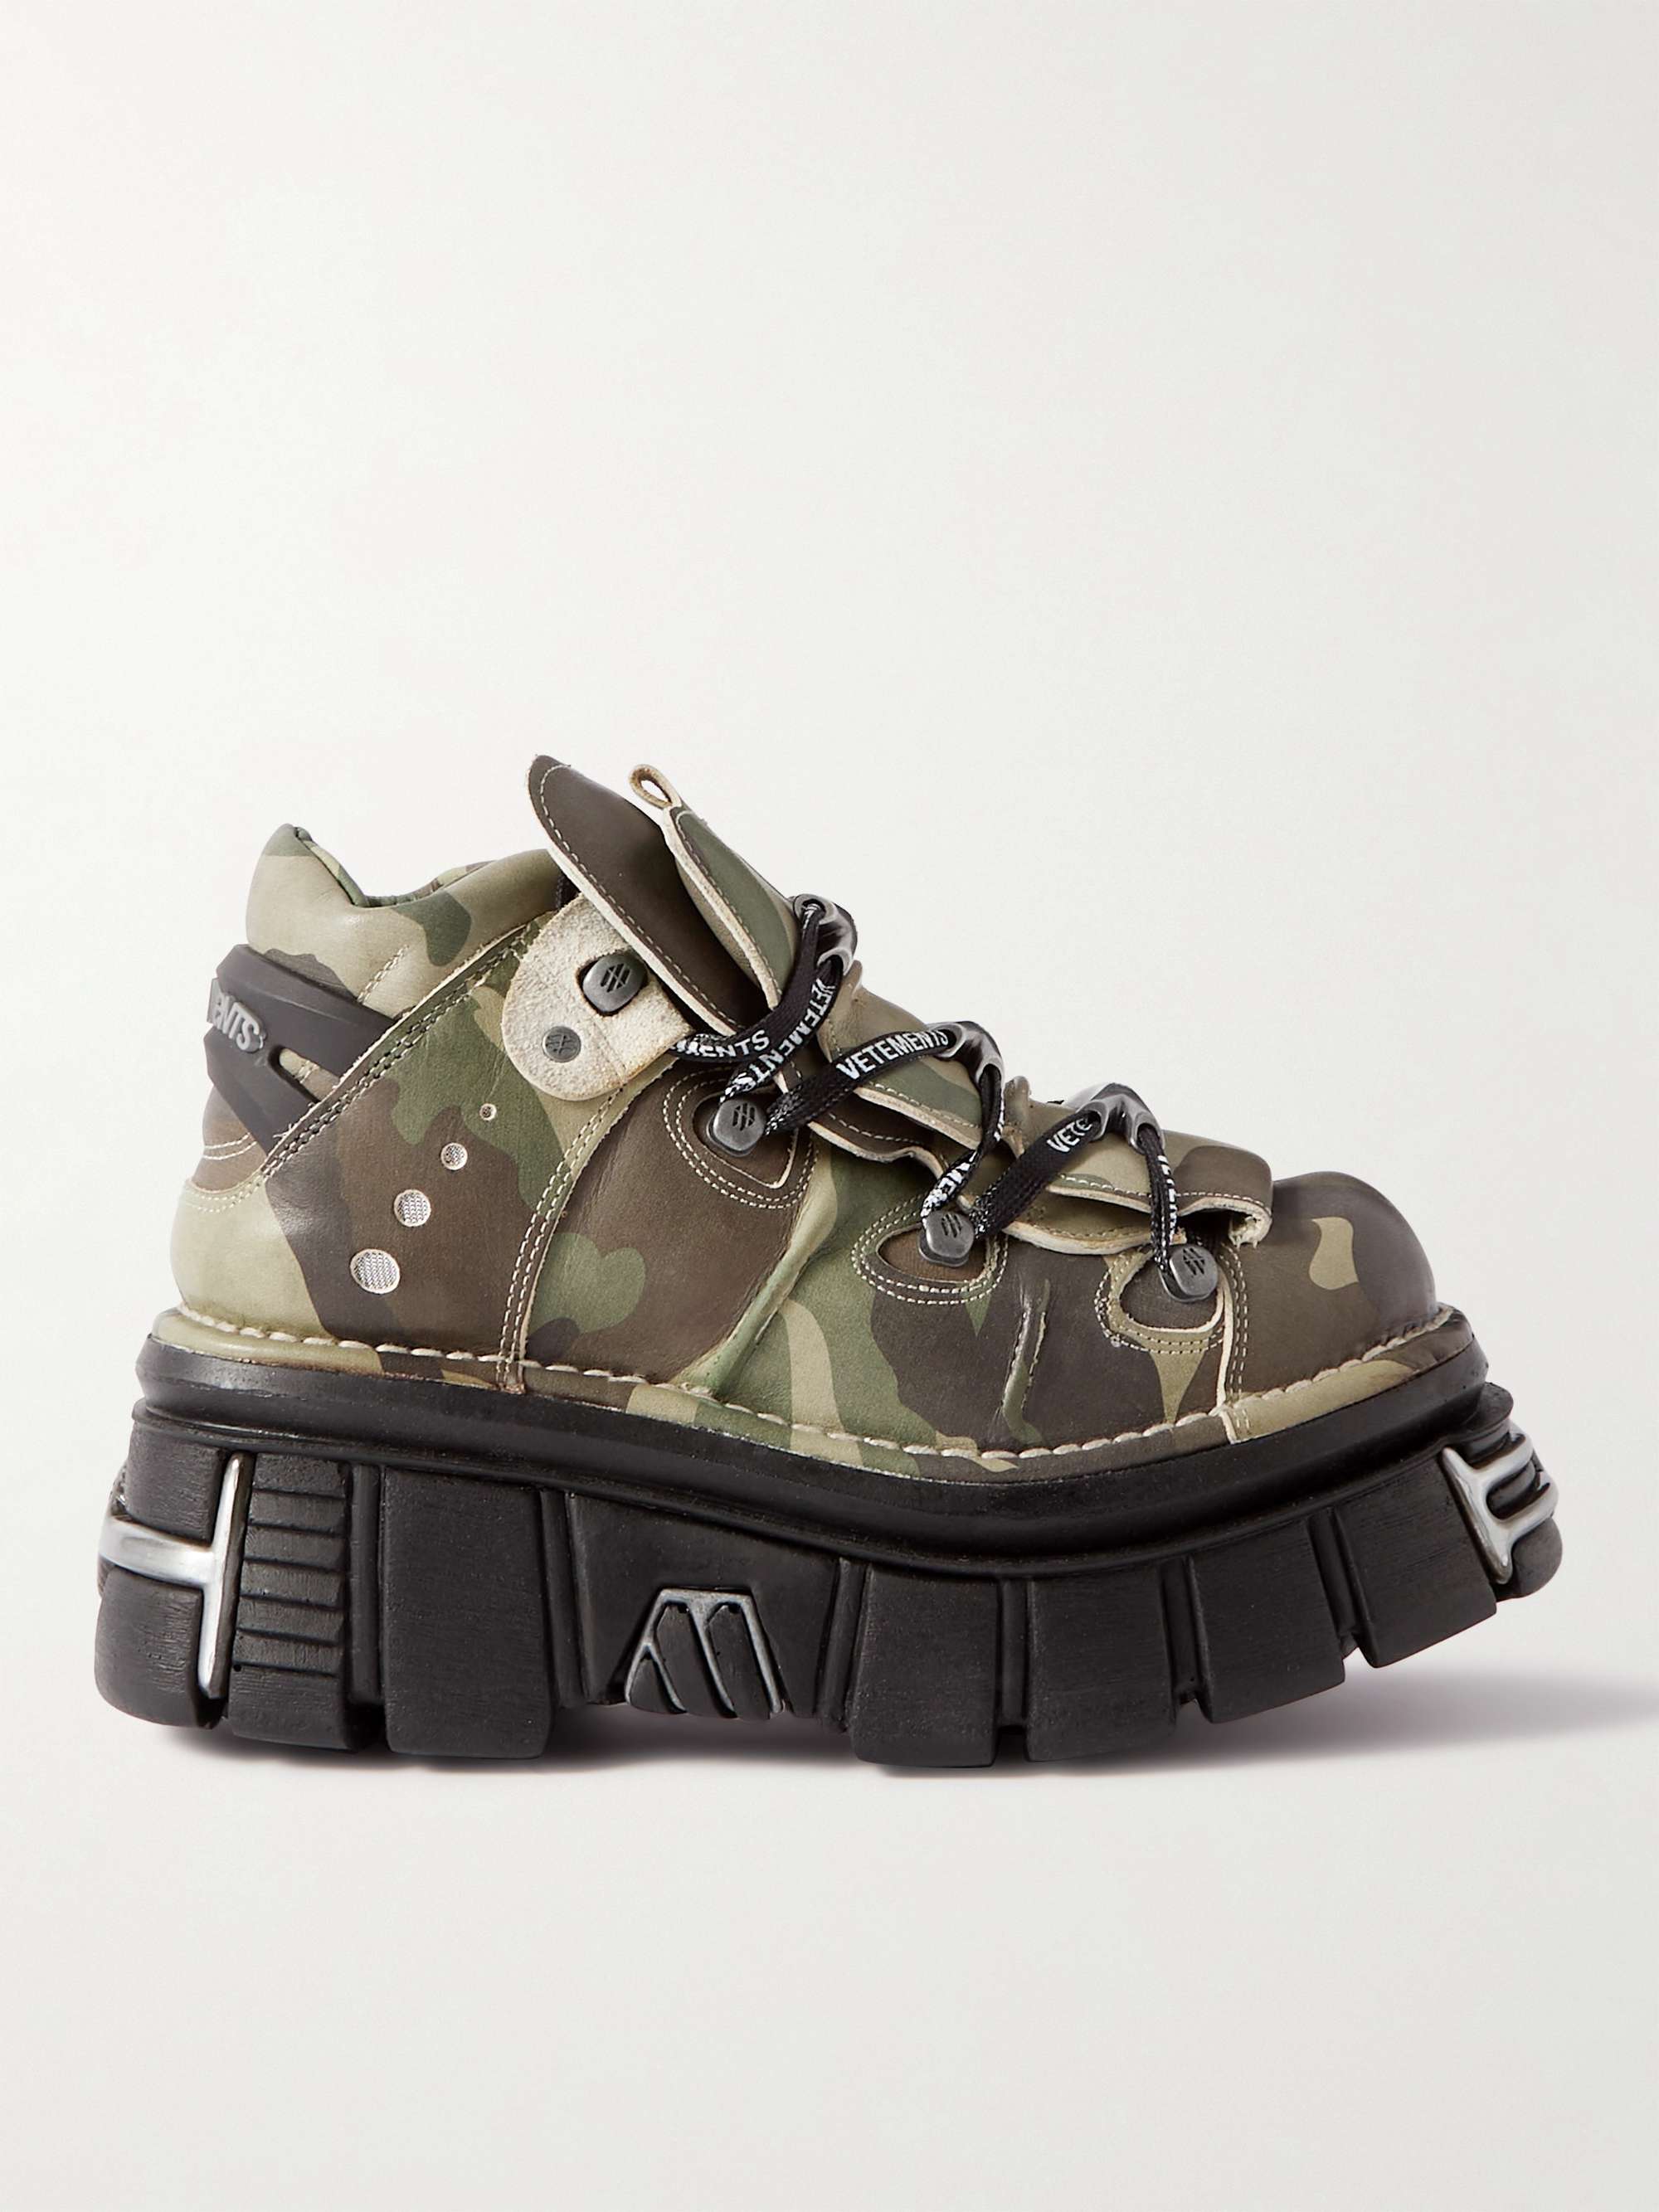 + New Rock Embellished Camouflage-Print Leather Platform Sneakers